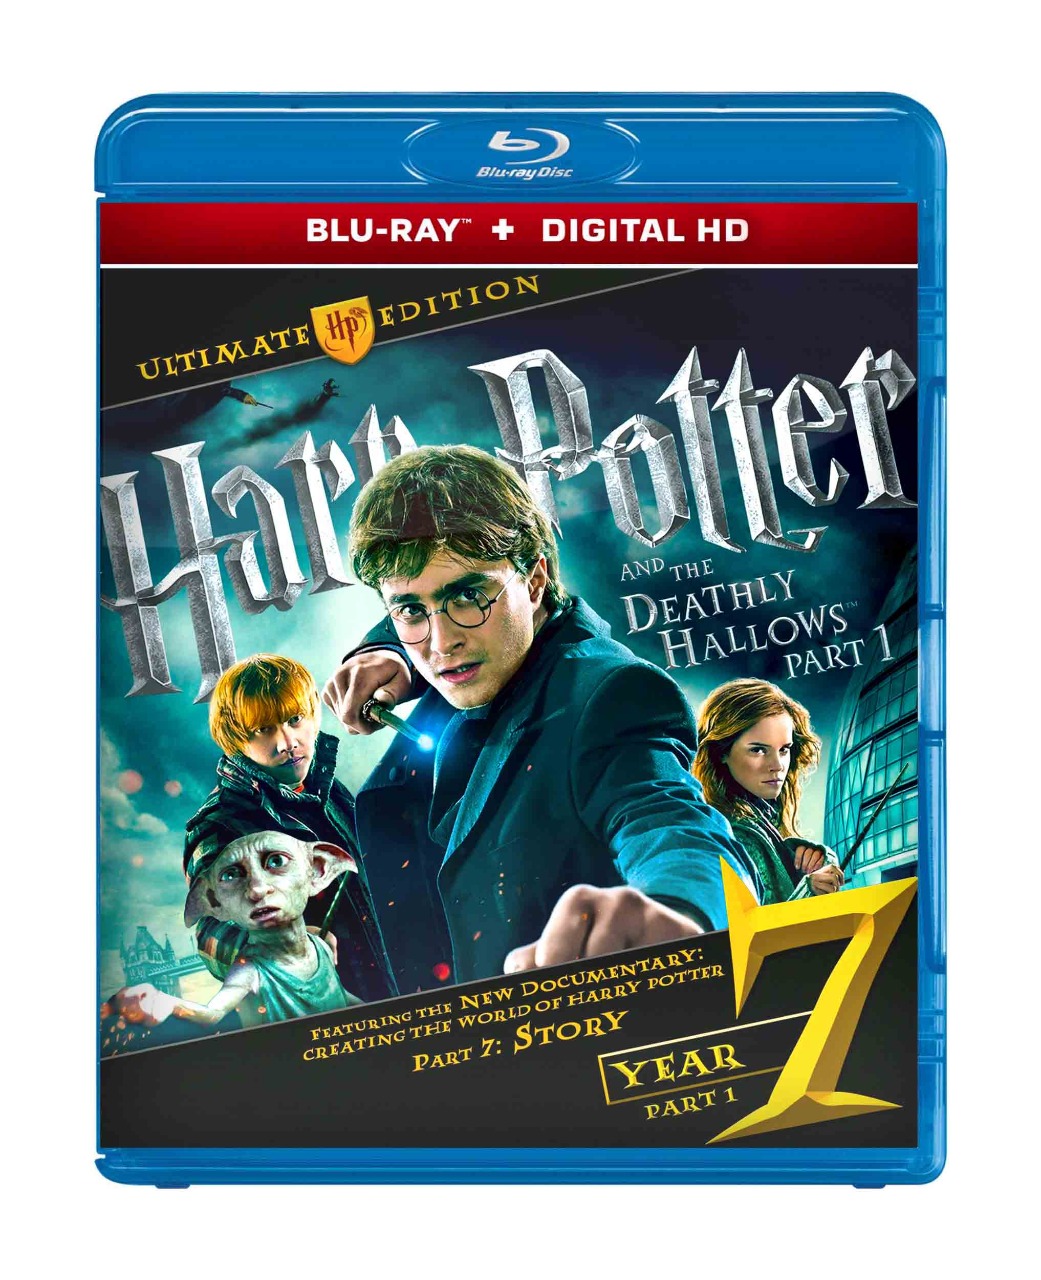 Harry Potter: Complete 8-Film Collection Blu-ray Region free